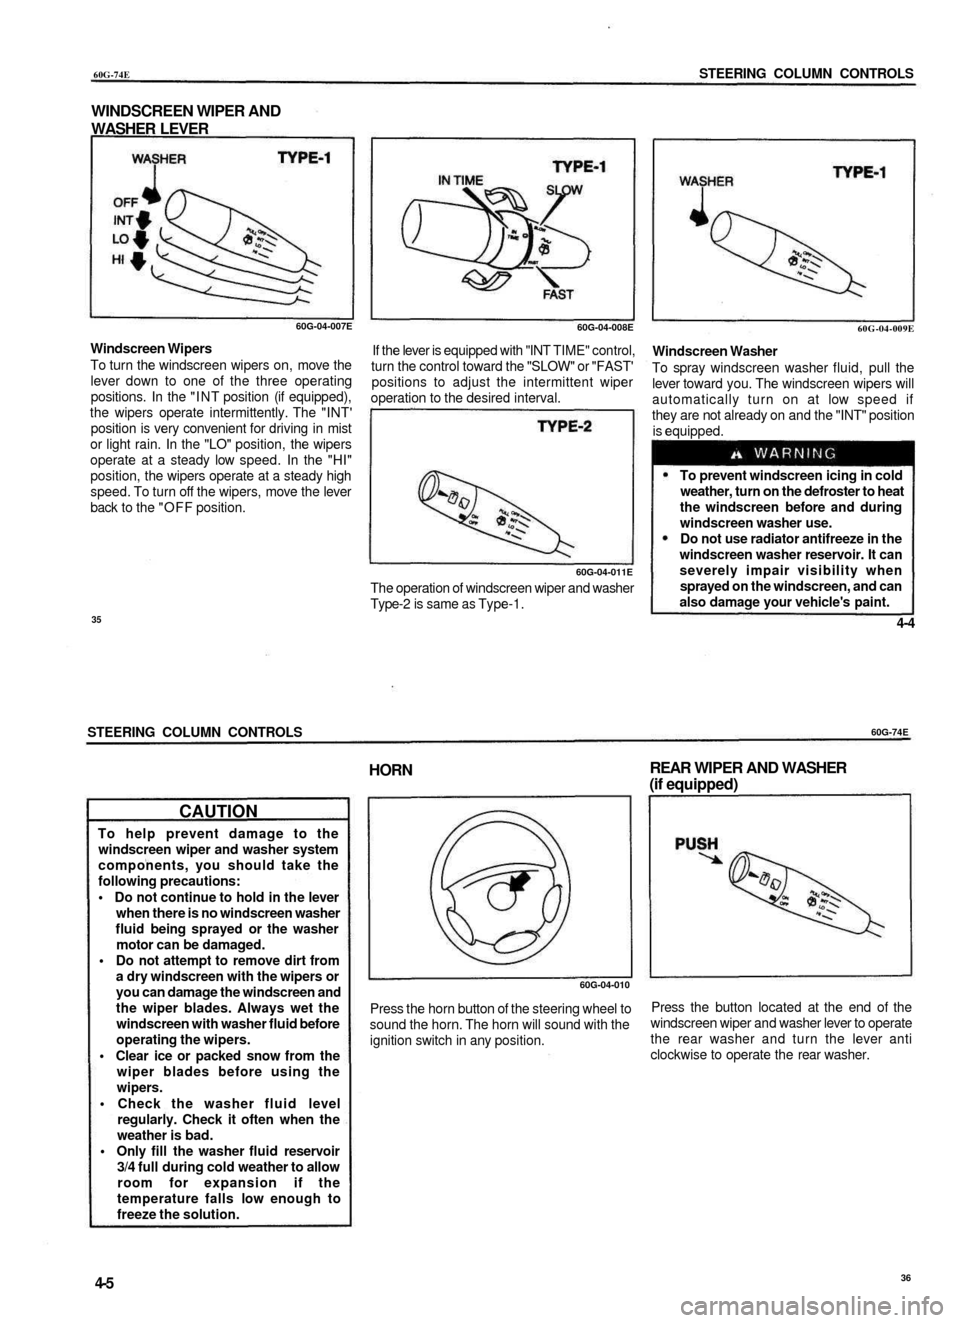 SUZUKI BALENO 1999 1.G User Guide 
60G-74E

STEERING COLUMN CONTROLS

WINDSCREEN WIPER AND

WASHER LEVER

60G-04-007E

Windscreen Wipers

To turn the windscreen wipers on, move the

lever down to one of the three operating

positions.